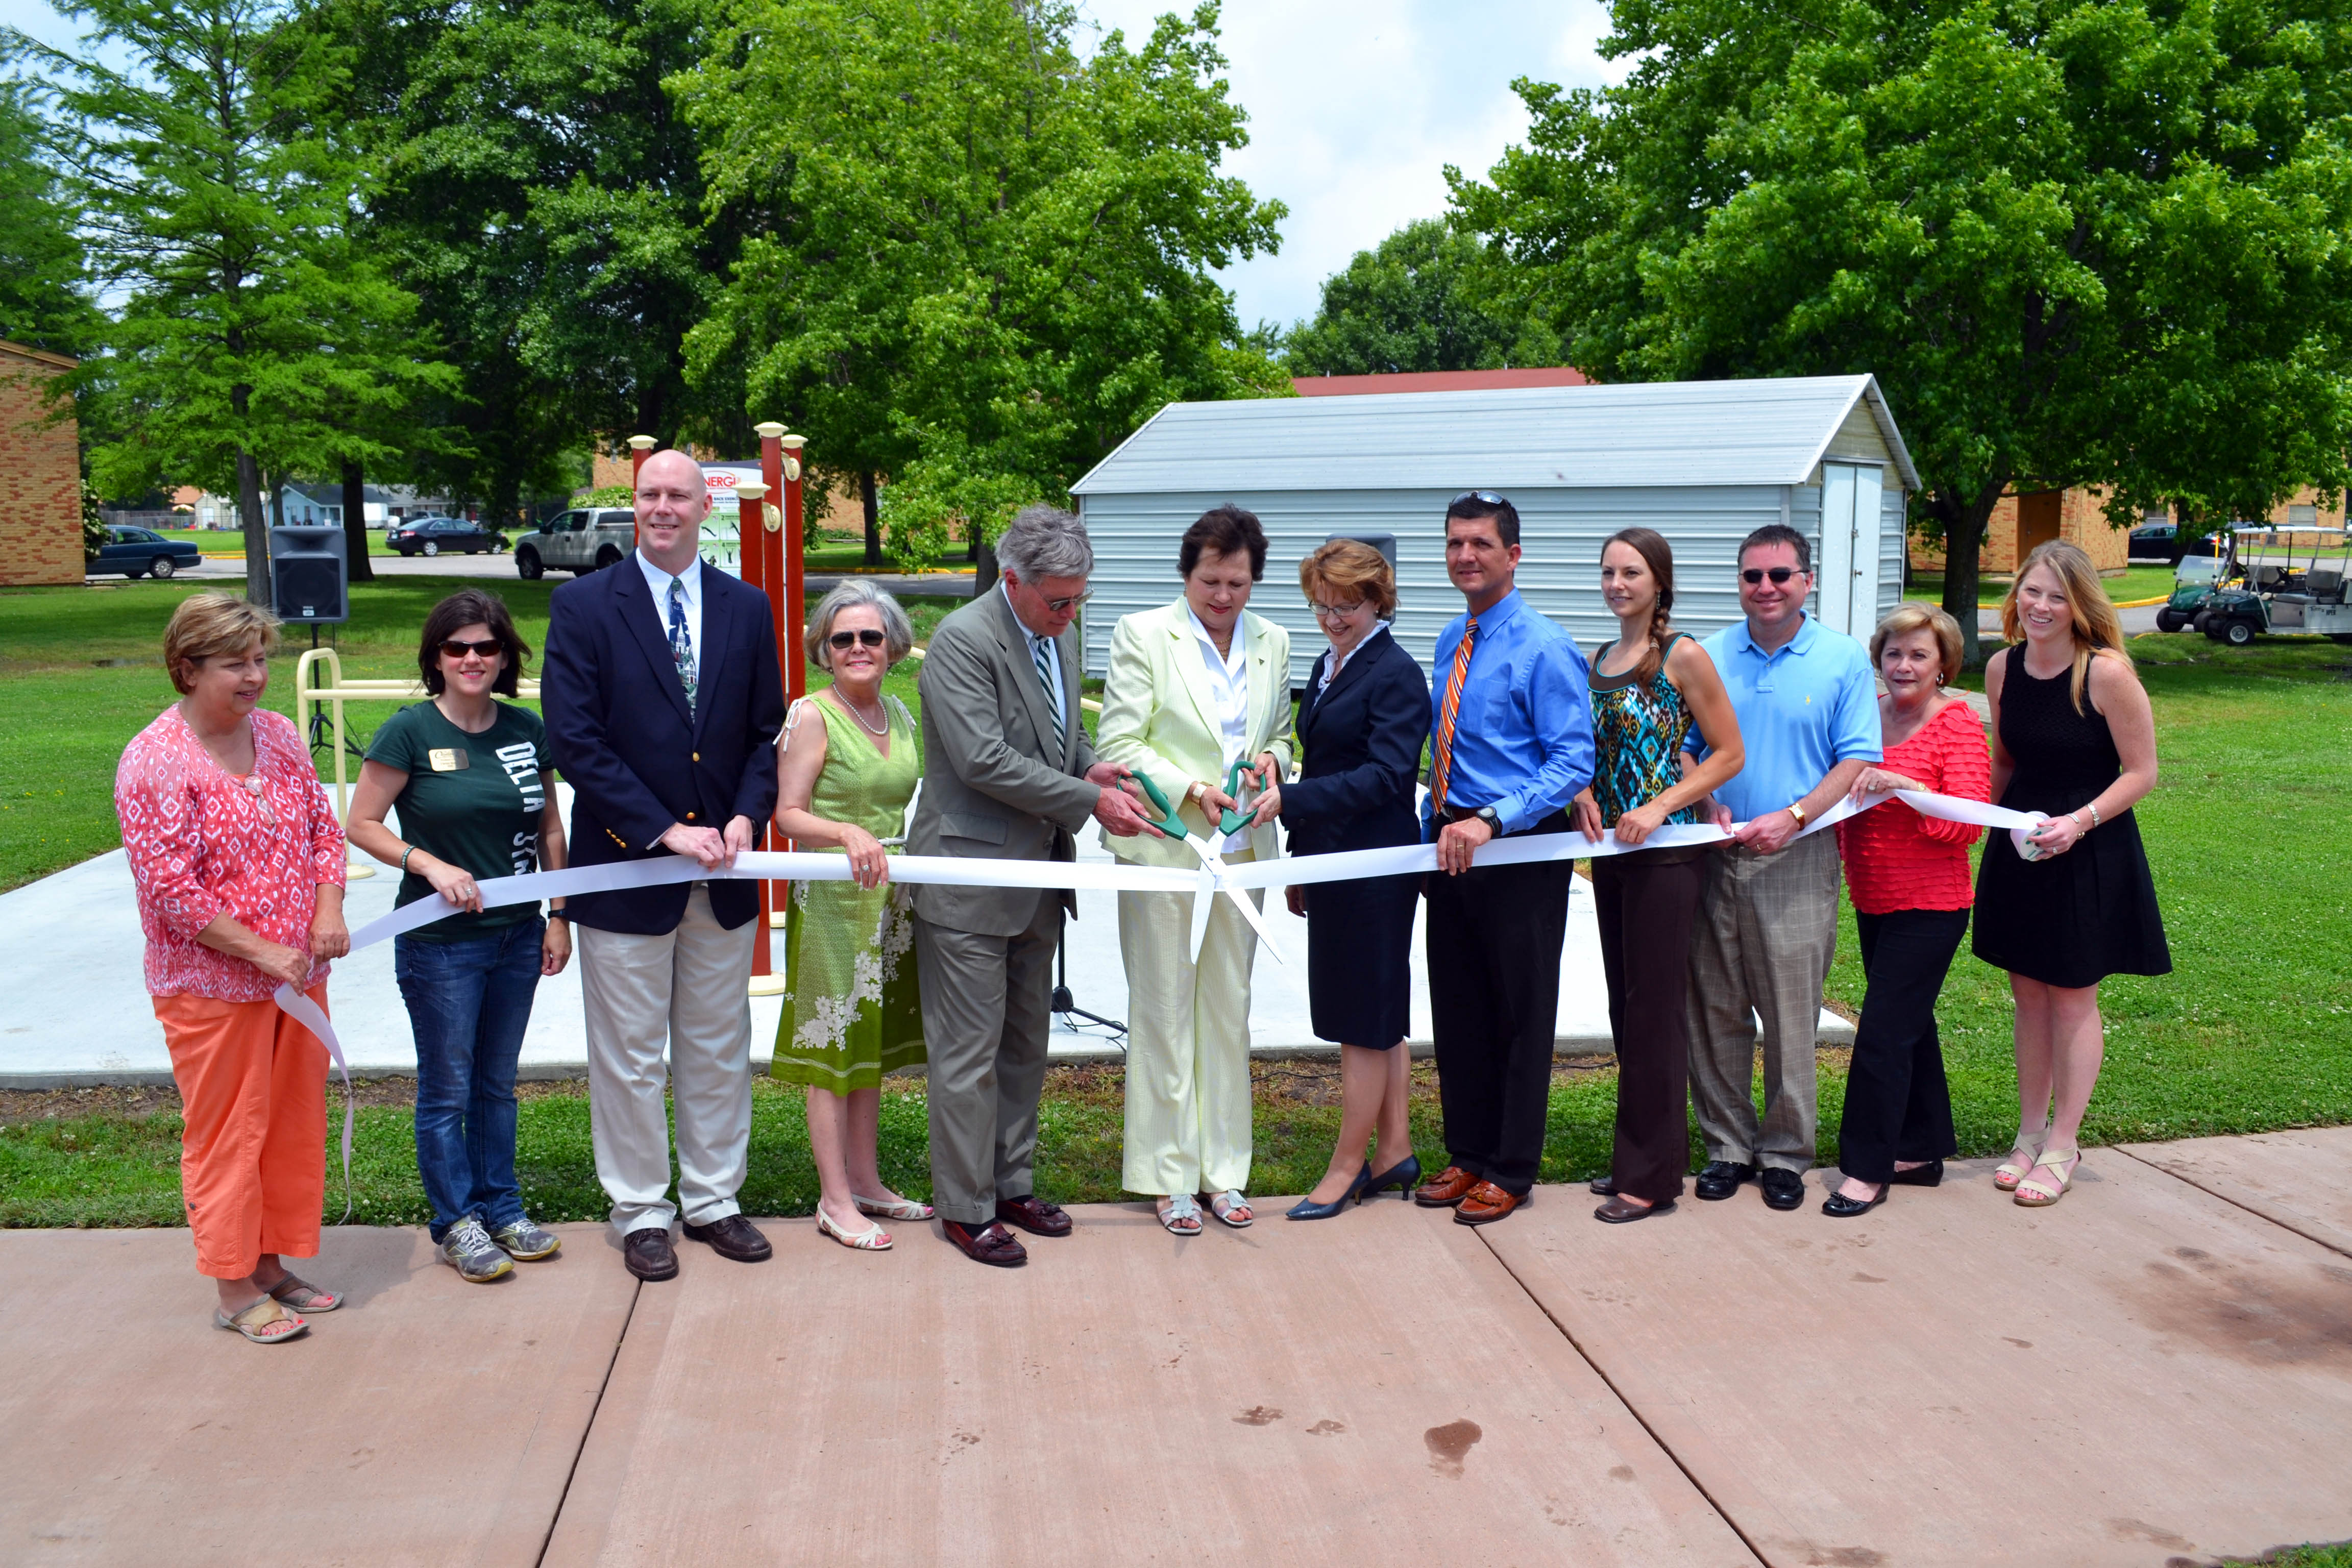 PHOTO:  Delta State University installs new exercise stations to its outdoor recreation facility. Pictured left to right are: Diane Makamson, Christy Riddle, Tim Colbert, Ann Lotven, William LaForge, Leslie Griffin, Sheila Grogan, Doug Pinkerton, Krista Davis, Rob Turner, Cynthia Petersen, and Suzette Matthews. 